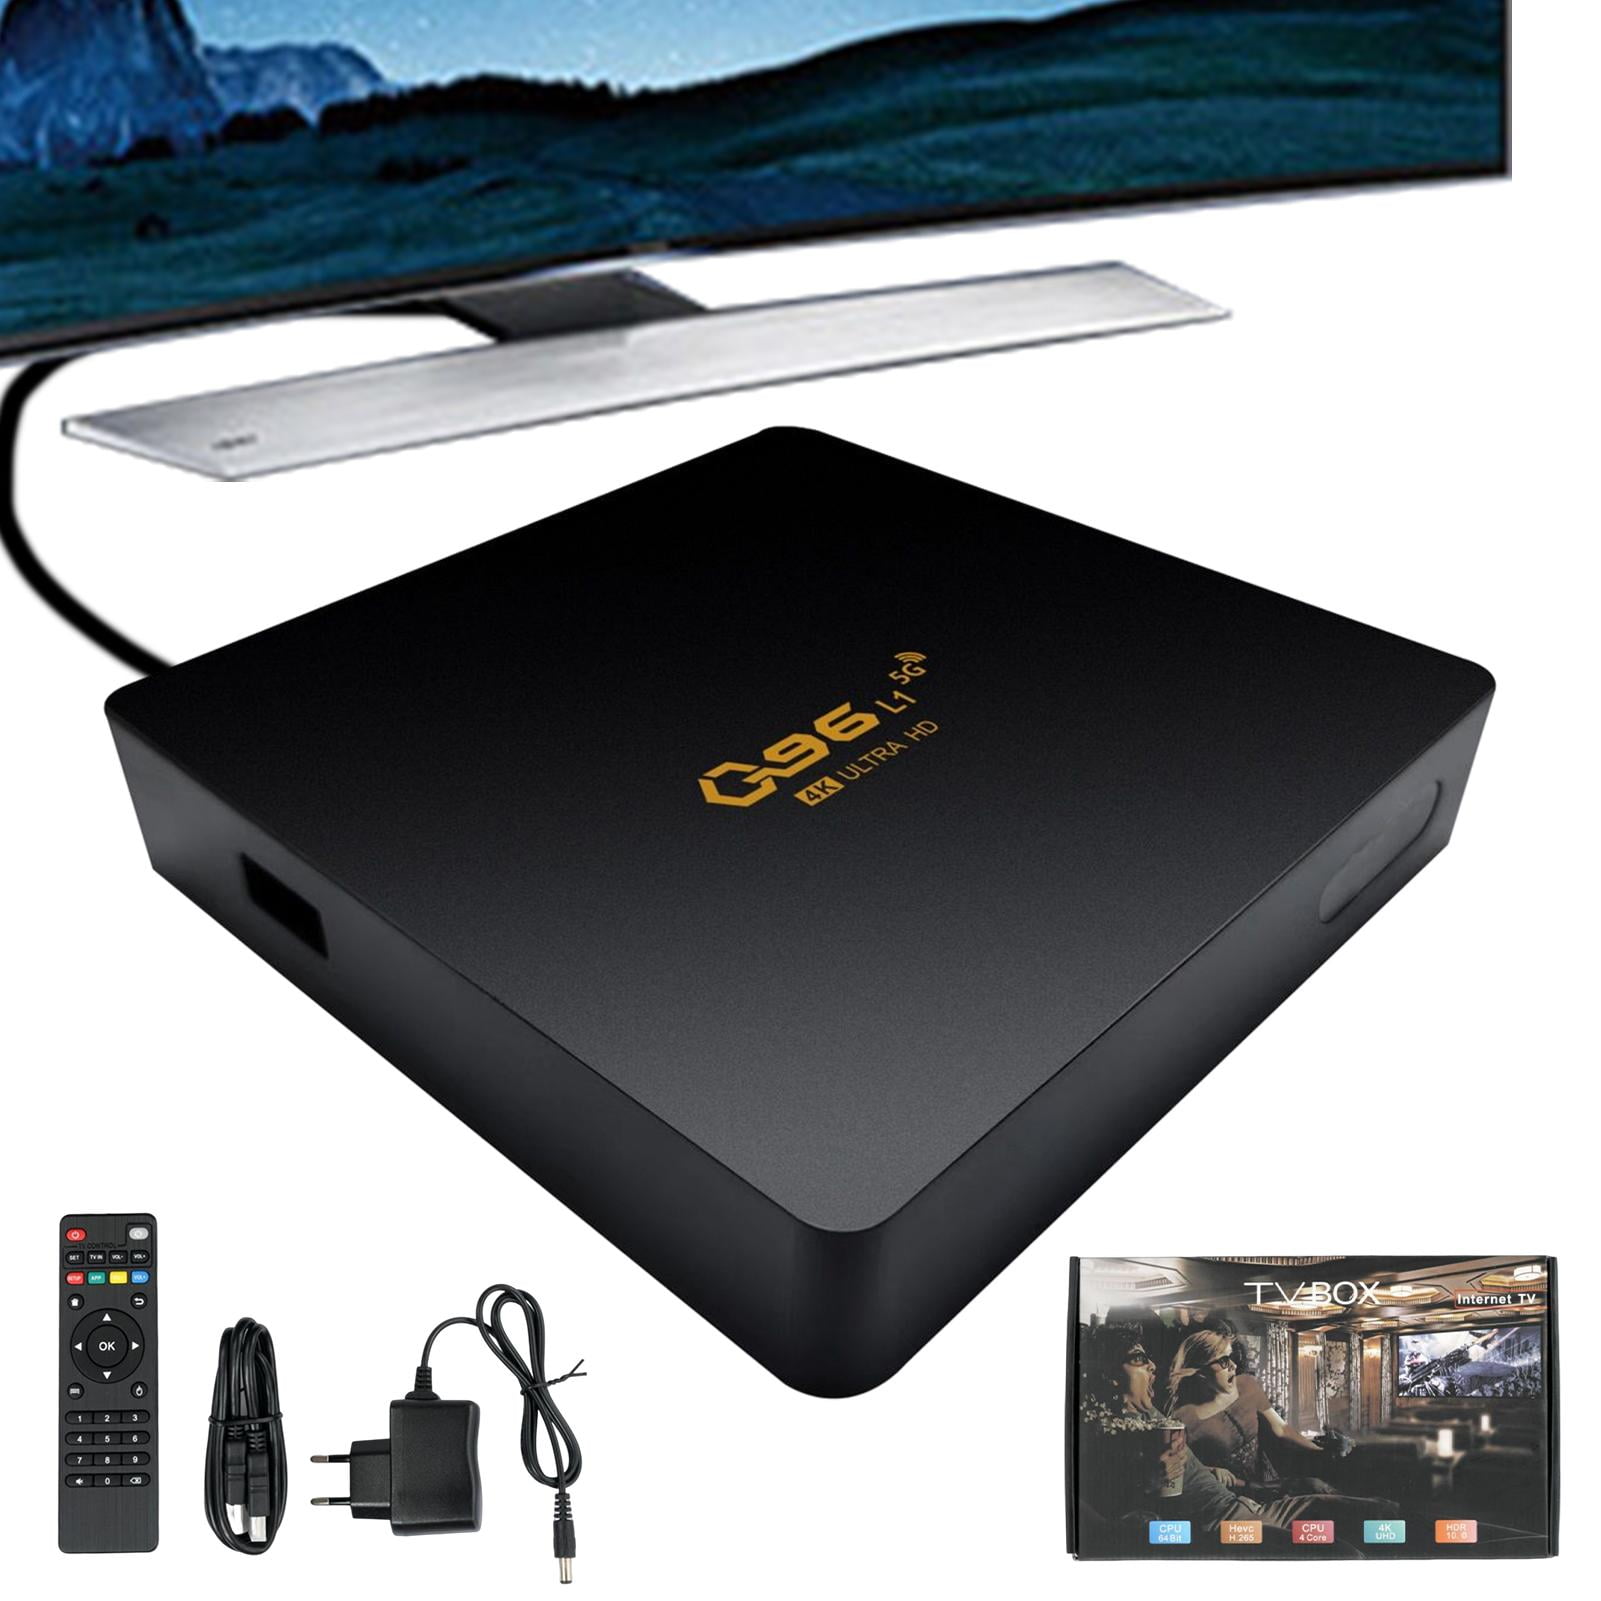 TV Box 4K Smart Media Player 8GB Q96 L1 Network TV Set Top Box Quad Core  Wifi Network Player Video Game Smart TV Box for Android 